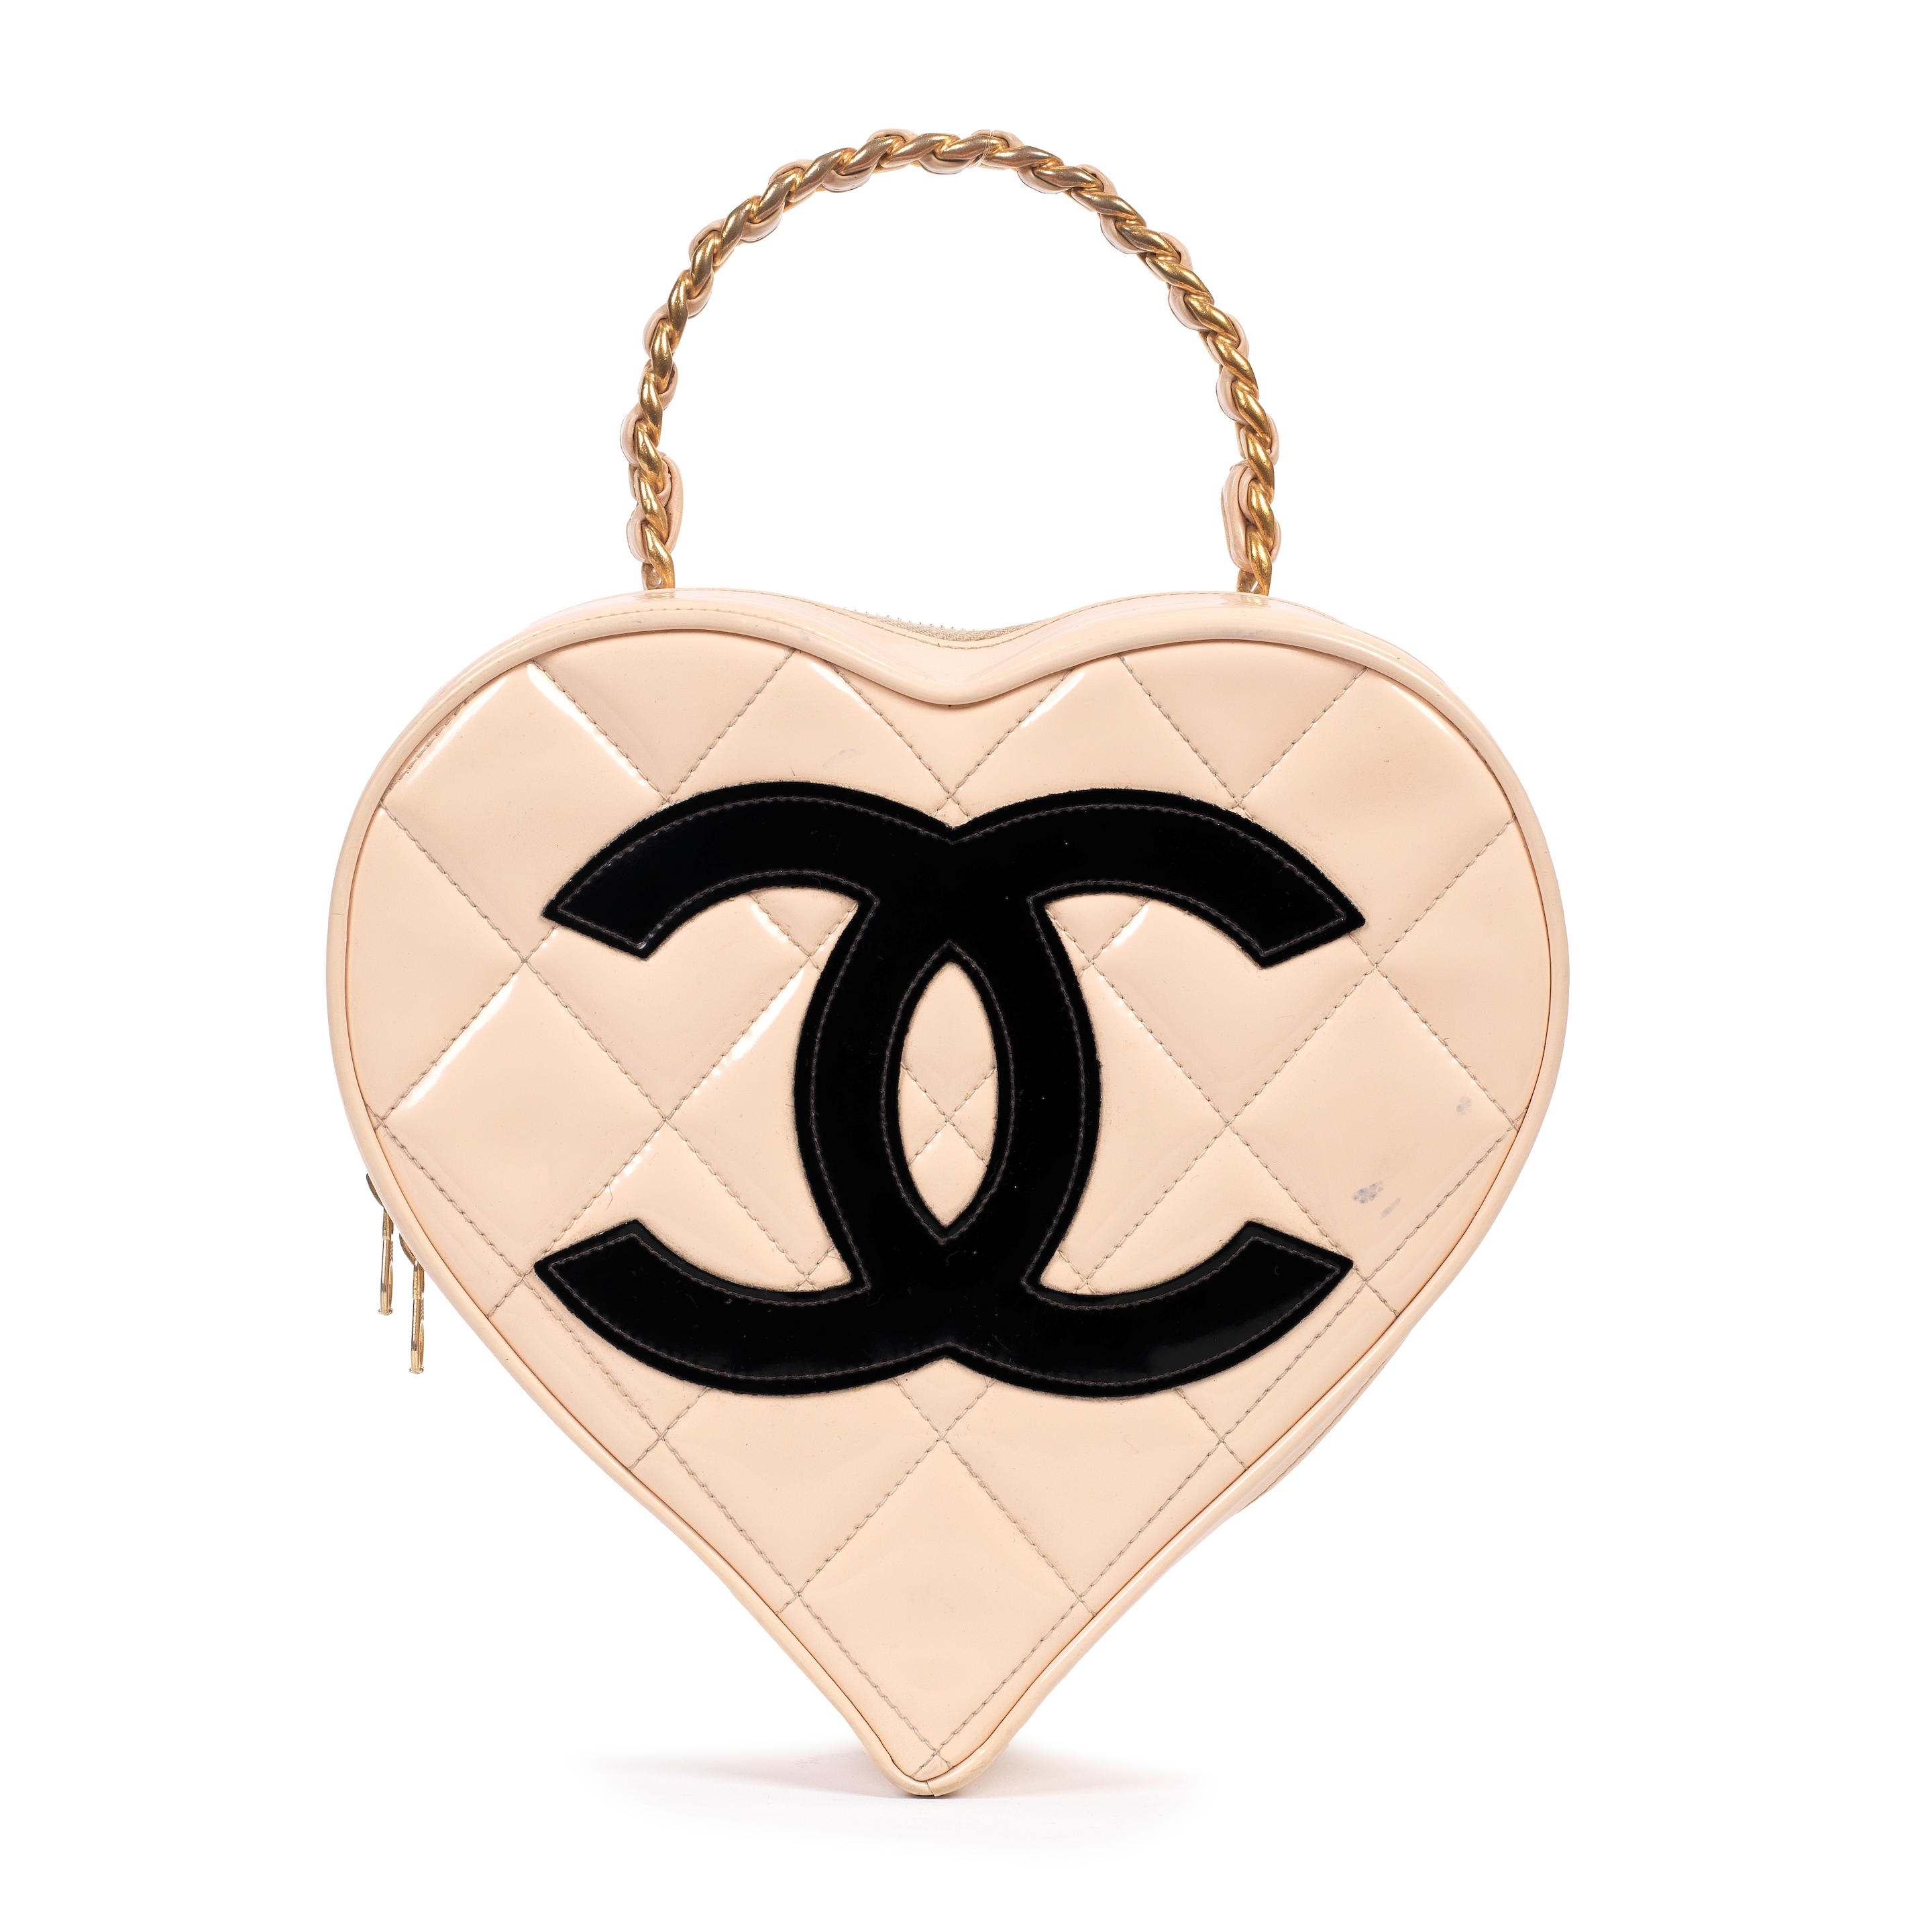 Karl Lagerfeld for Chanel a Beige Patent Leather Heart Vanity Bag Spring  1995 (includes serial sticker, authenticity card and box) - Bonhams